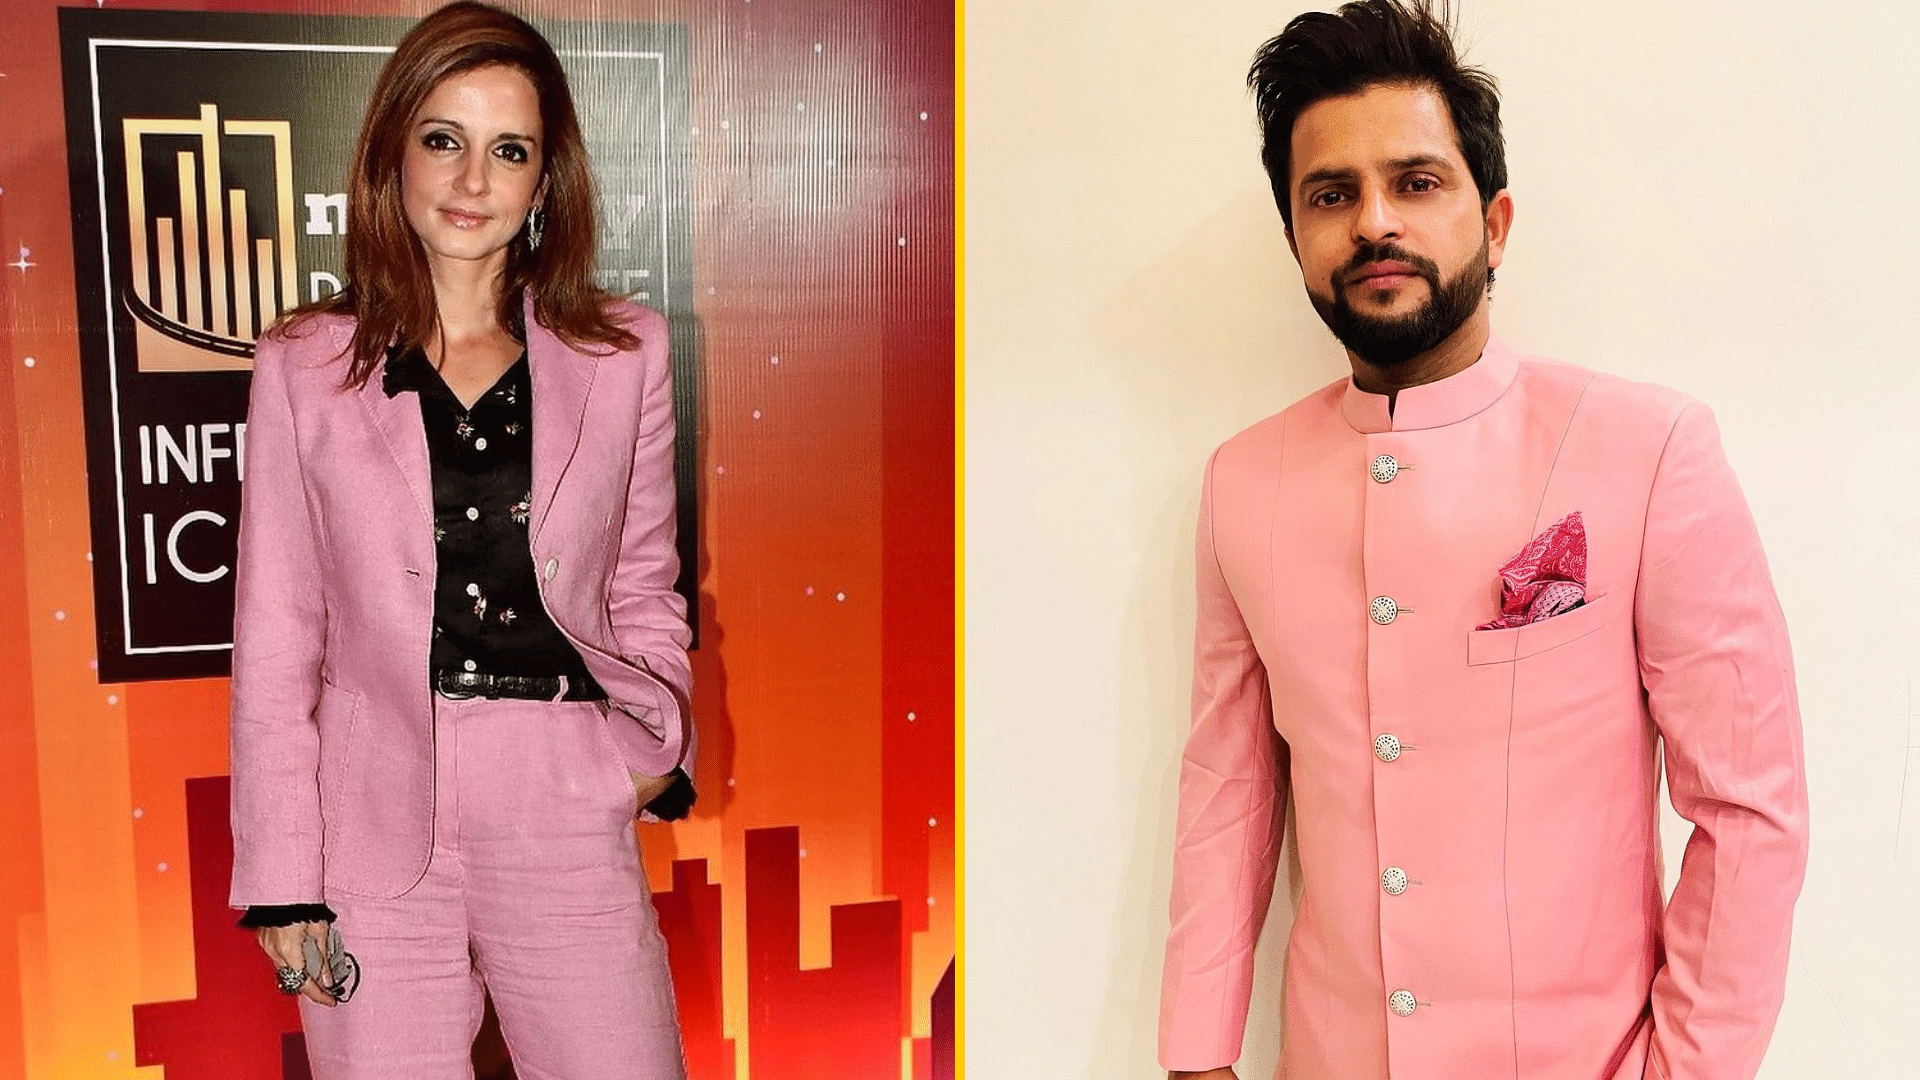 Sussanne Khan and Suresh Raina are among those who have been booked for violating COVID-19 restrictions.